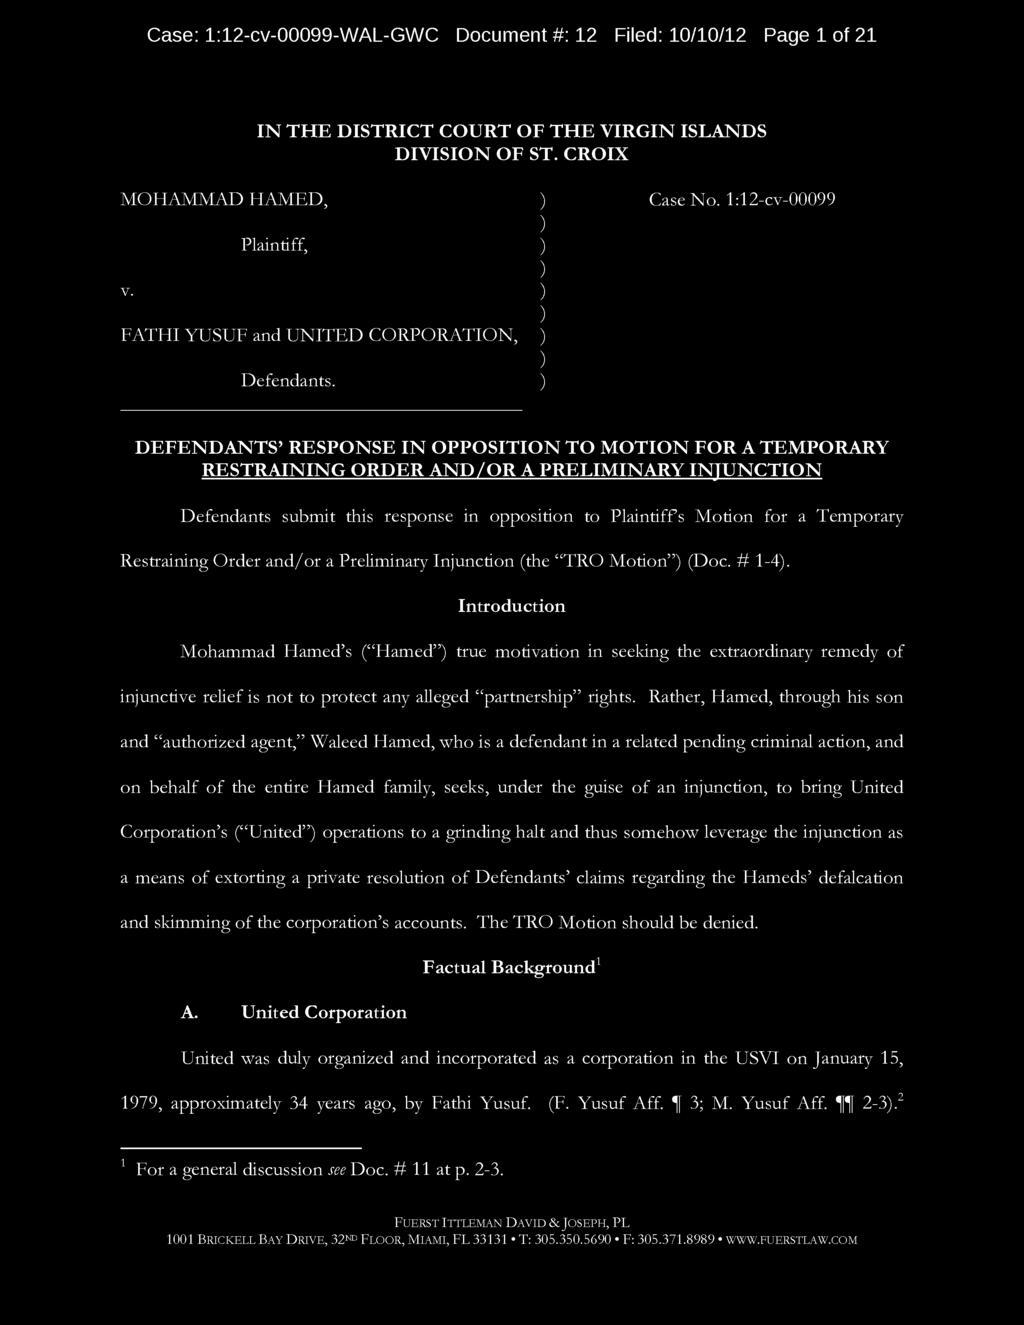 Case: 1:12 -cv- 00099 -WAL -GWC Document #: 12 Filed: 10/10/12 Page 1 of 21 IN THE DISTRICT COURT OF THE VIRGIN ISLANDS DIVISION OF ST. CROIX MOHAMMAD HAMED, Case No. 1:12 -cv -00099 Plaintiff, v.